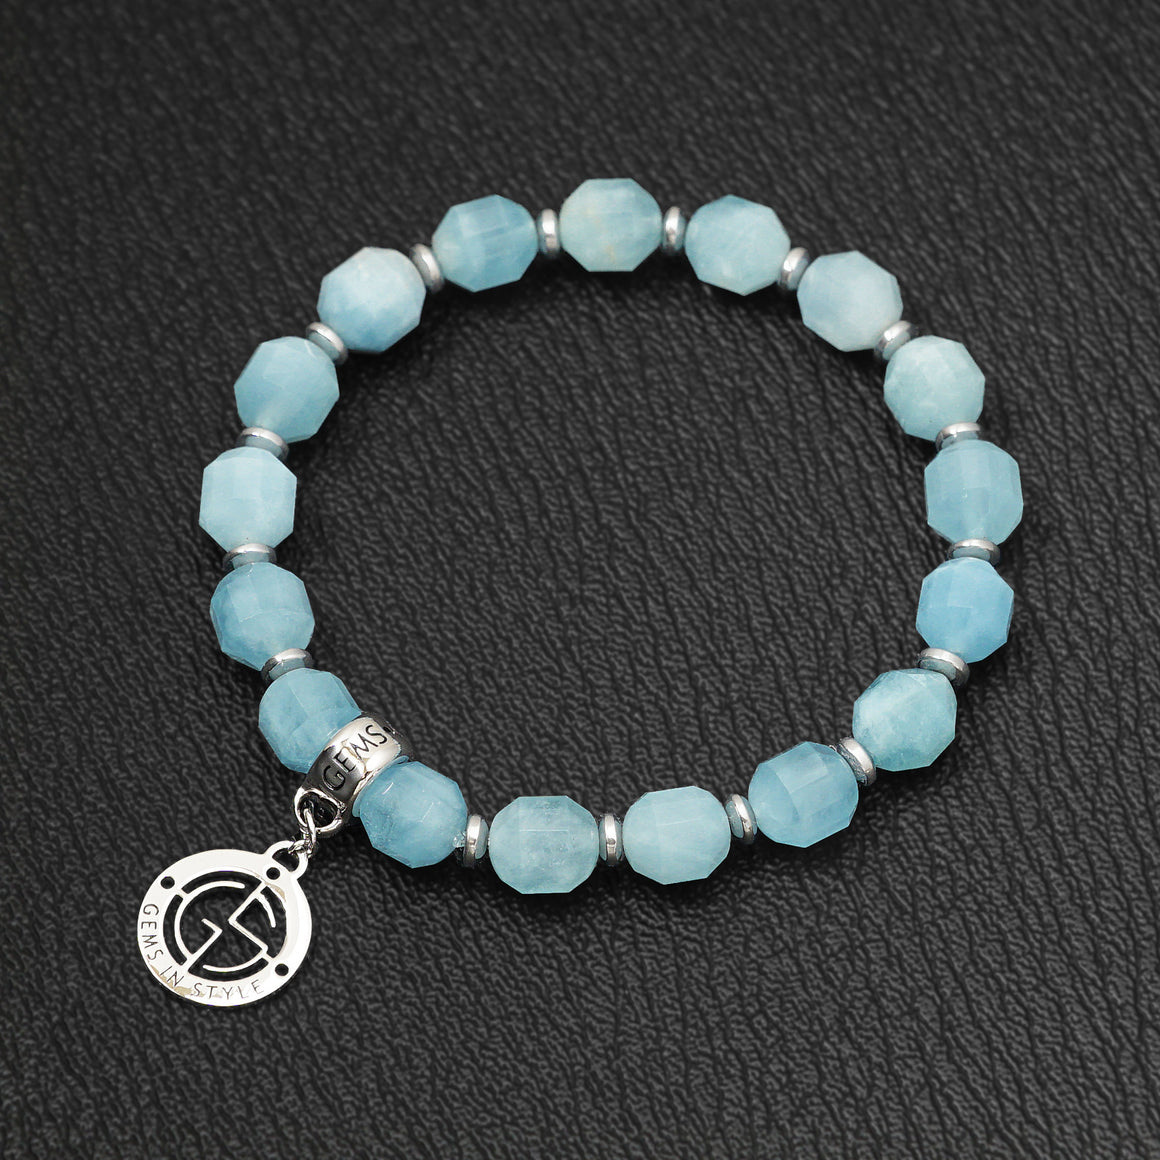 Aquamarine bracelet with silver charm by Gems In Style Jewellery